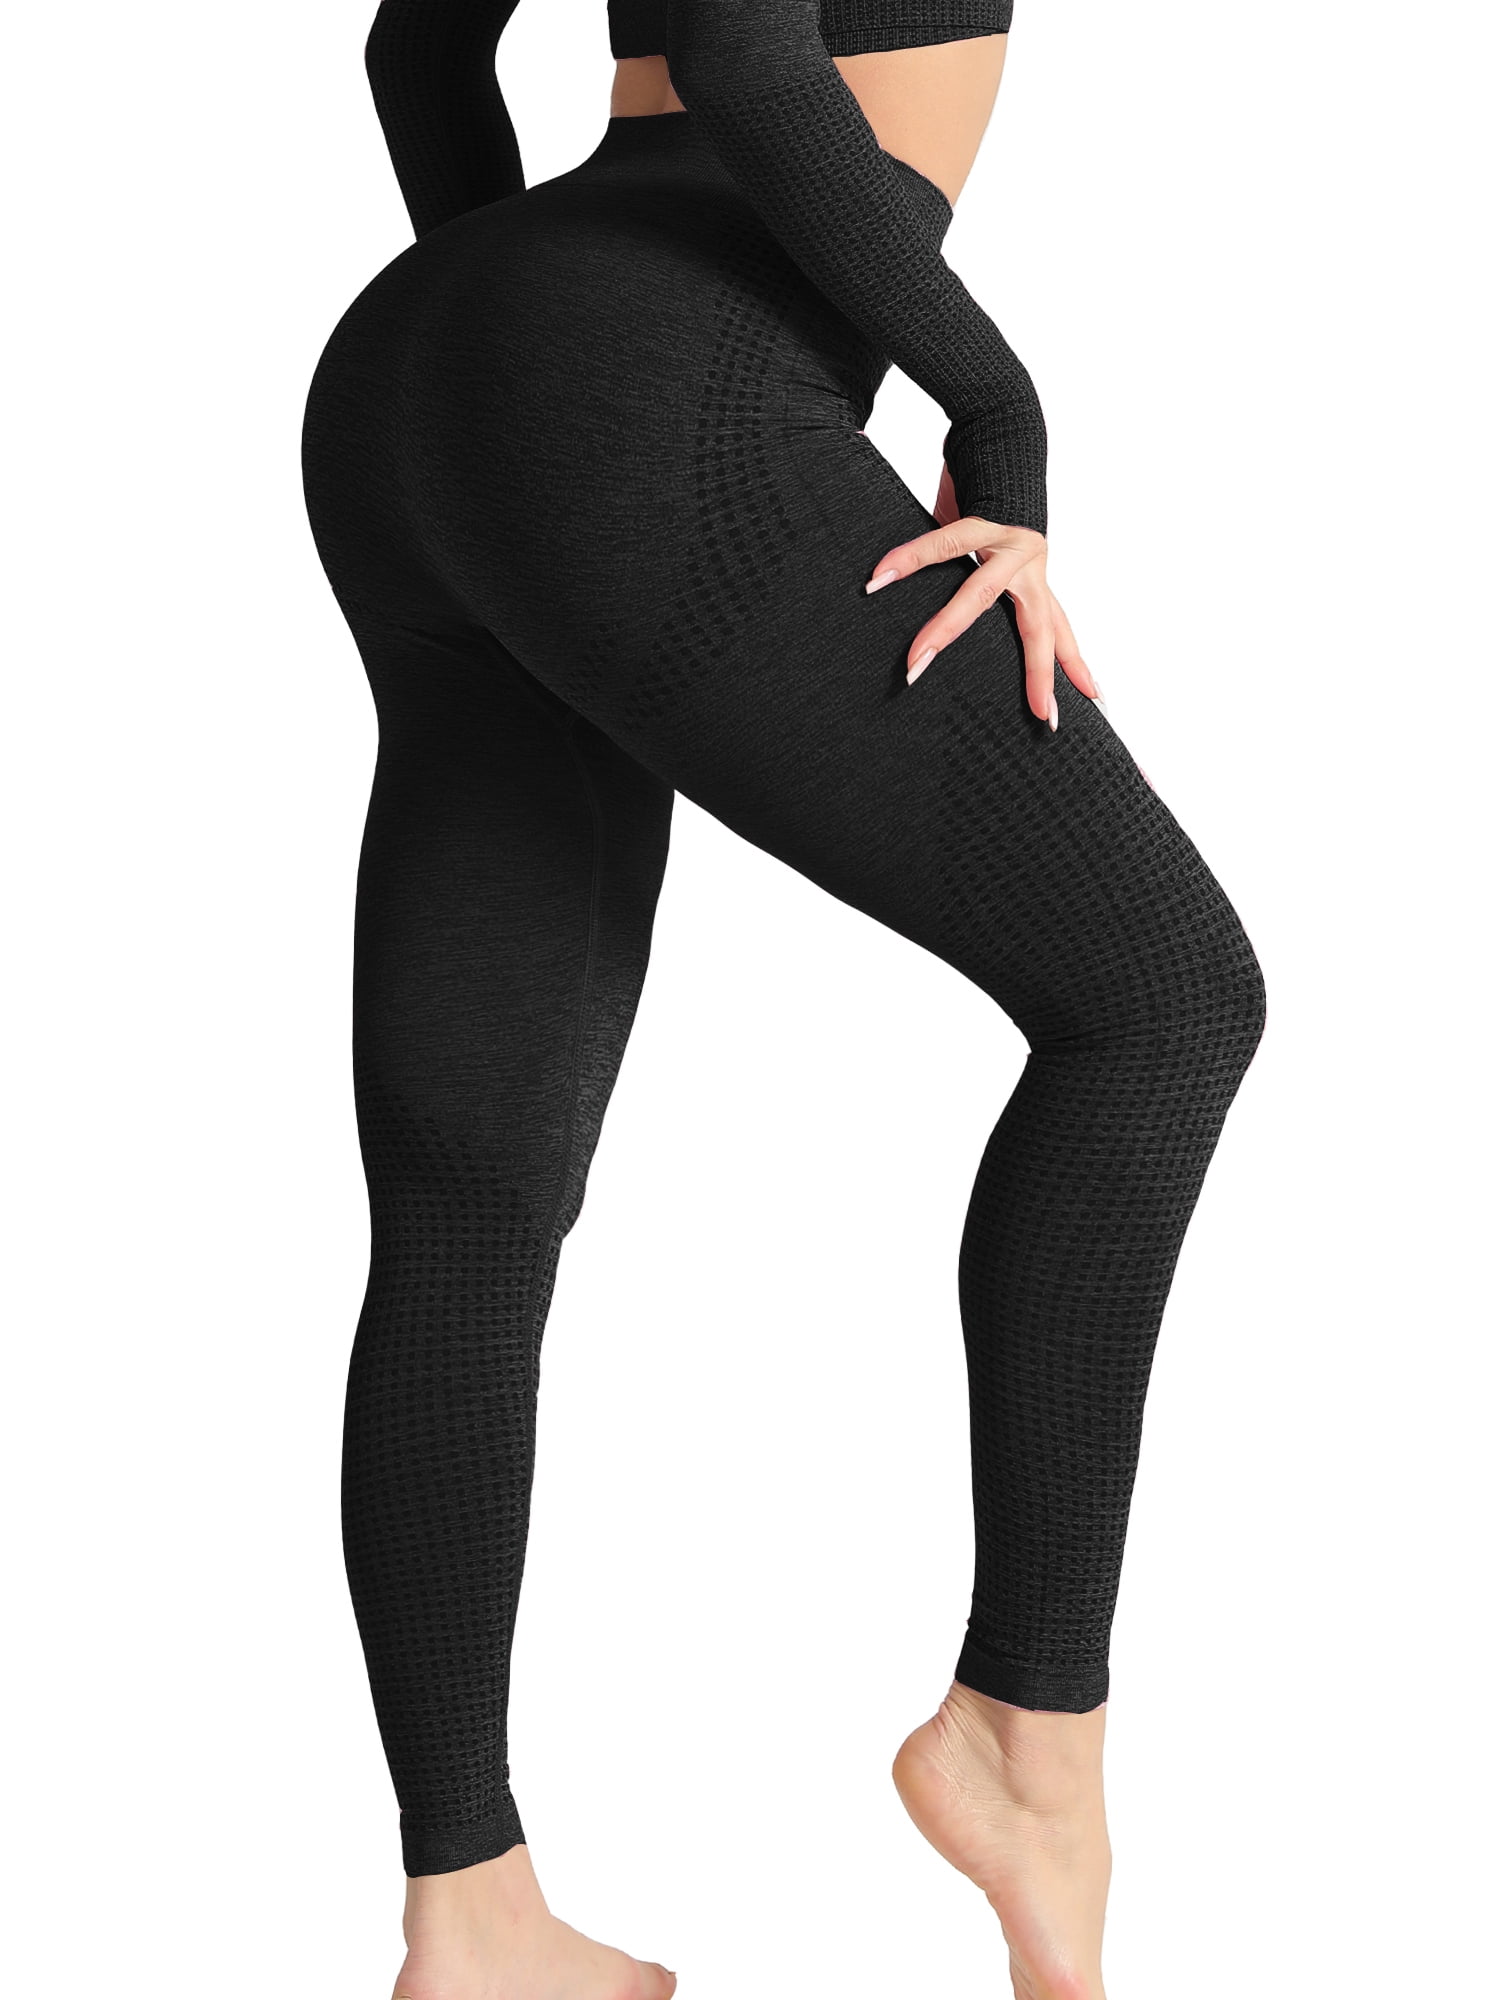 vnnink Professional Yoga Leggings for Women Ultra Stretch Soft High Waisted  Yoga Pants with Pockets Tummy Control Black X-Large